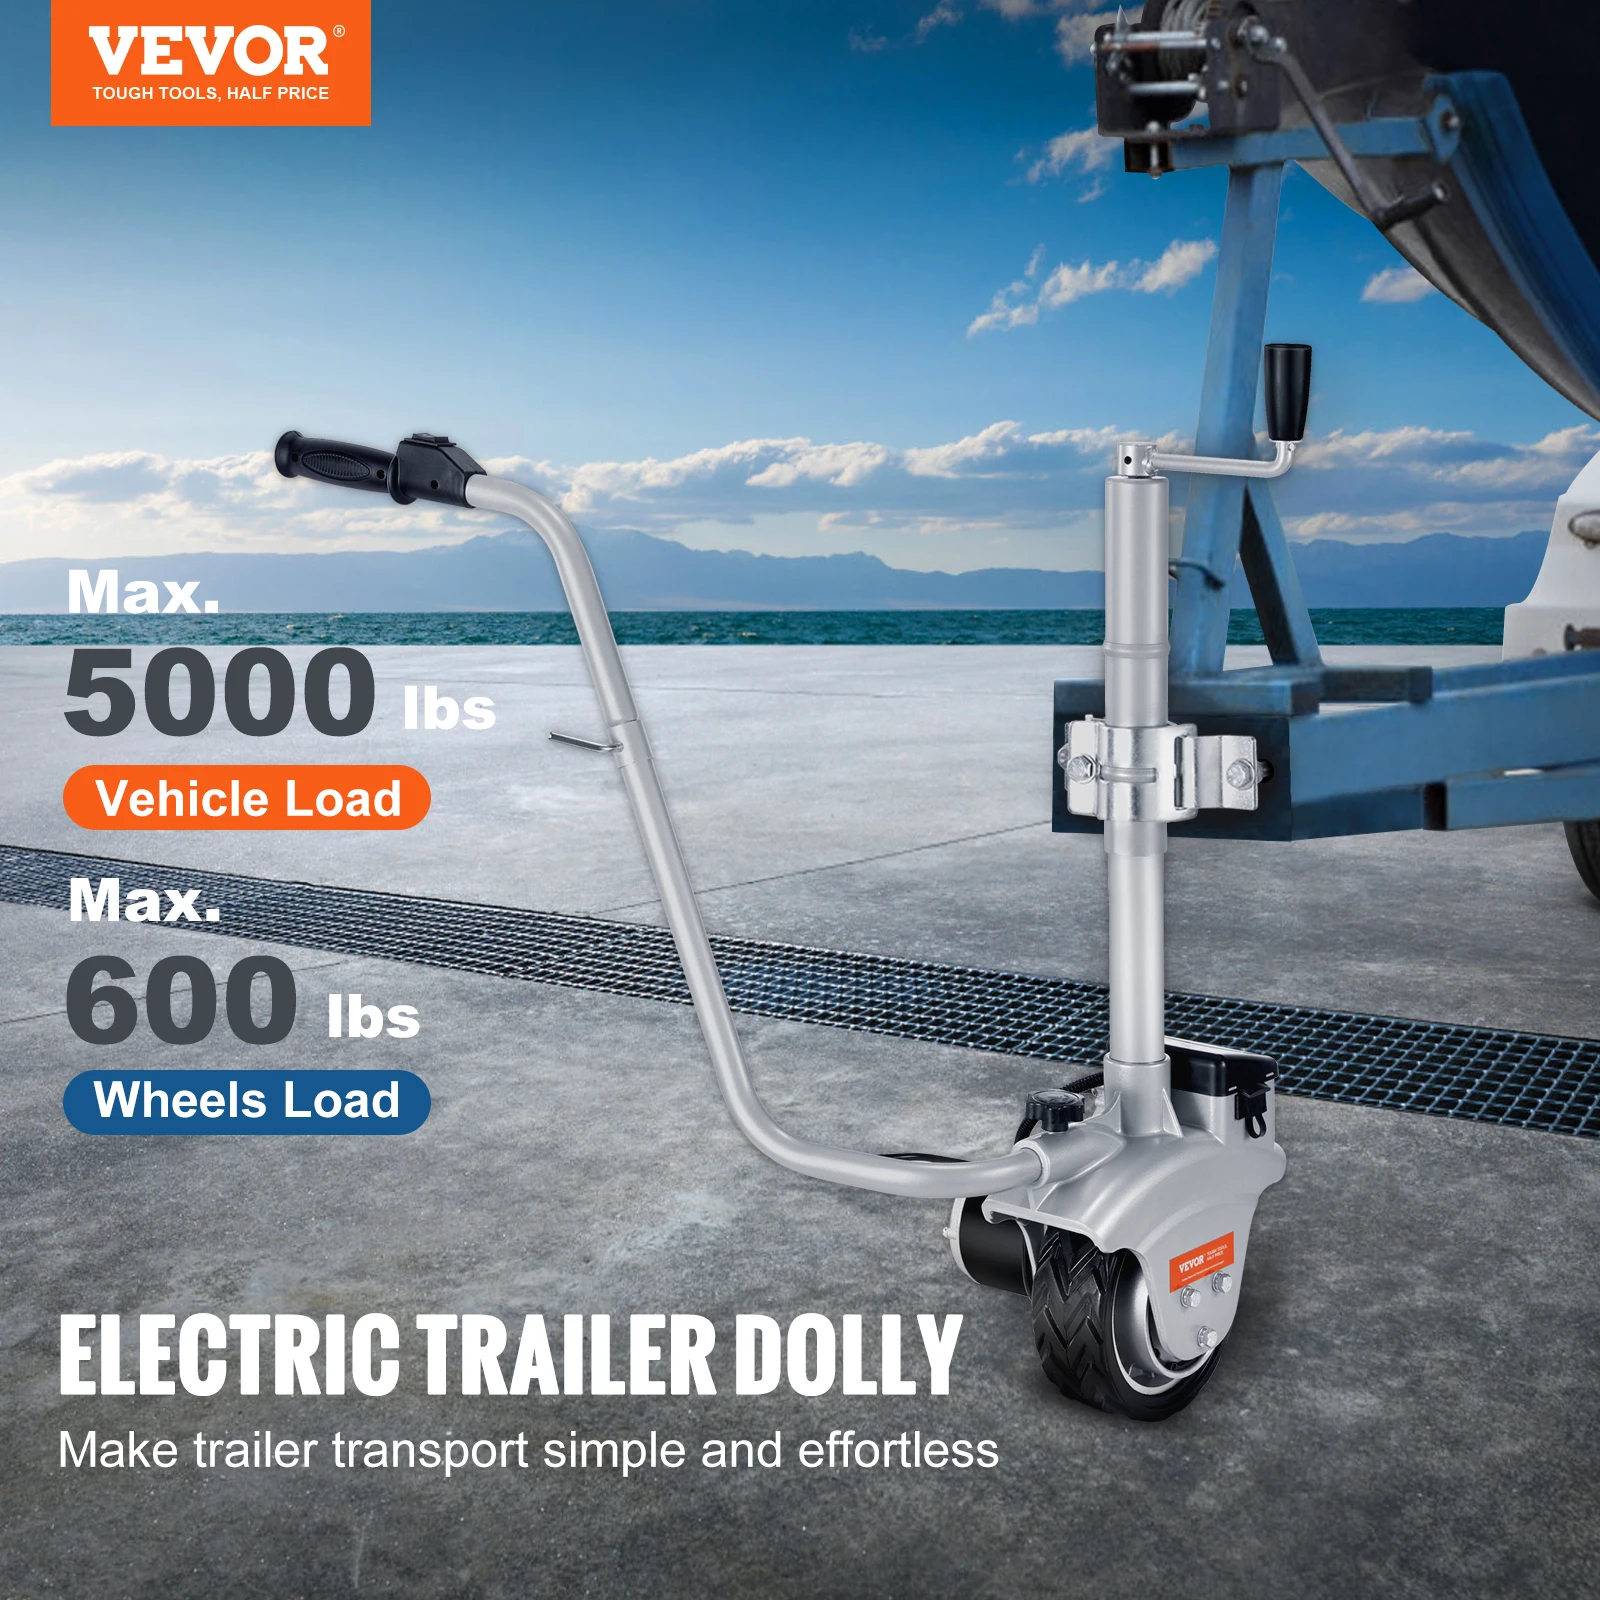 VEVOR 12V Motorized Electric Trailer Mover Dolly 5000lbs Towing Capacity Adjustable Clamp Jockey Wheel for Moving Caravan Boat